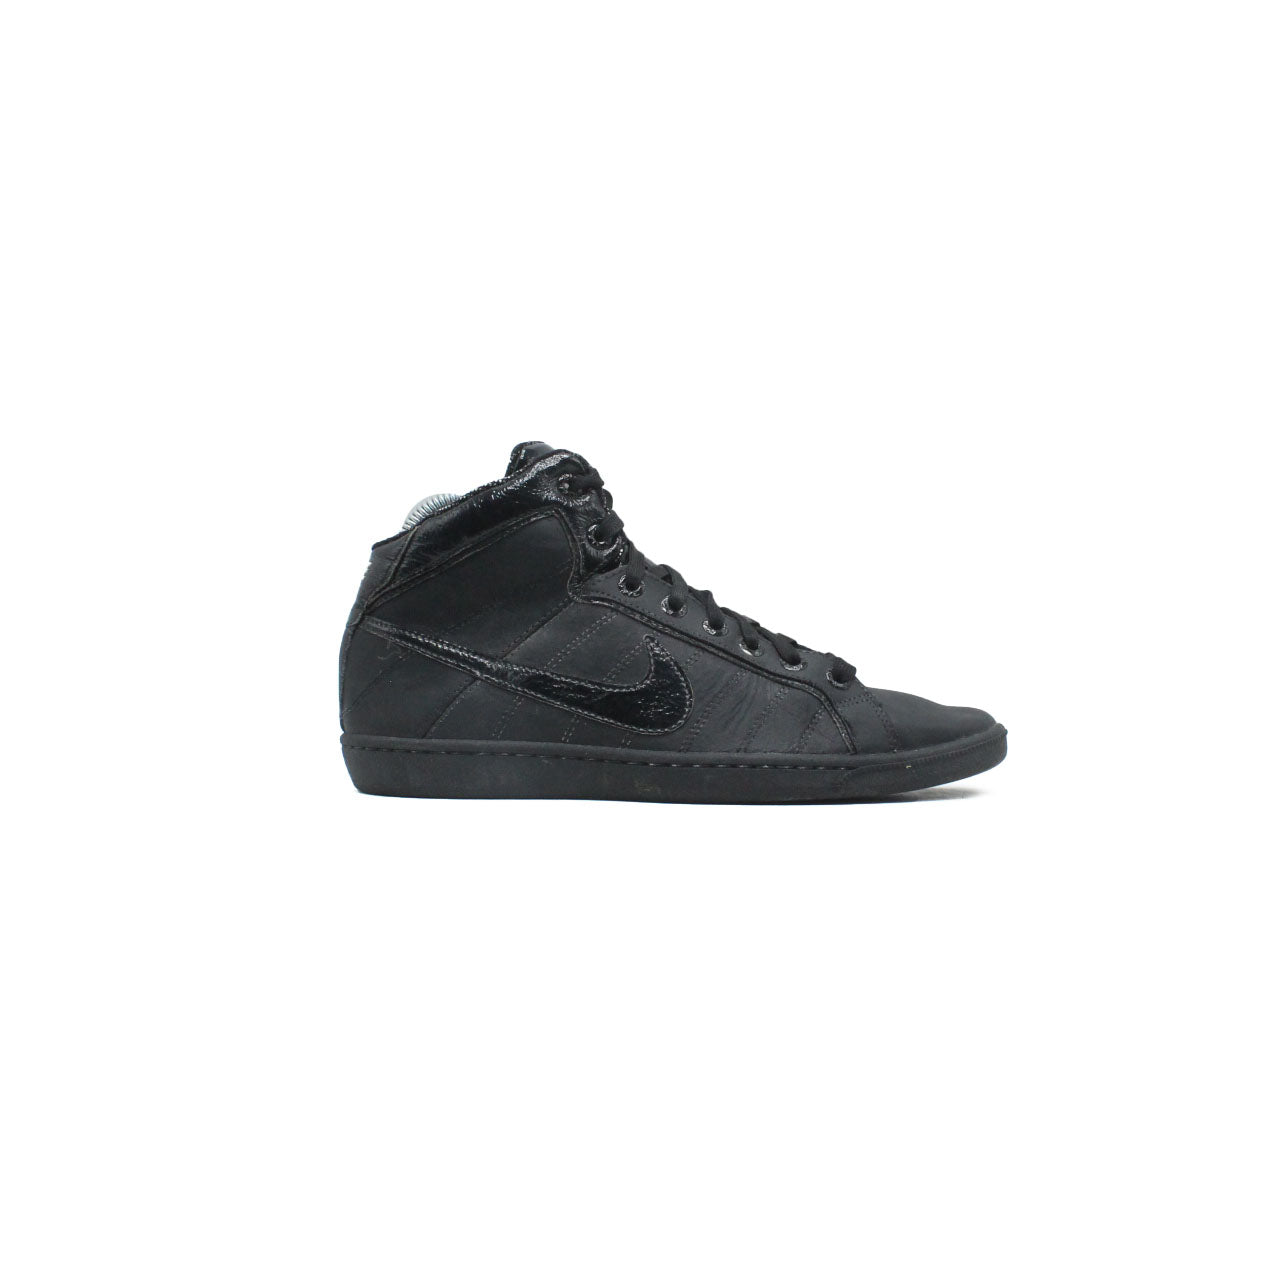 Nike Court Tradition LT Mid